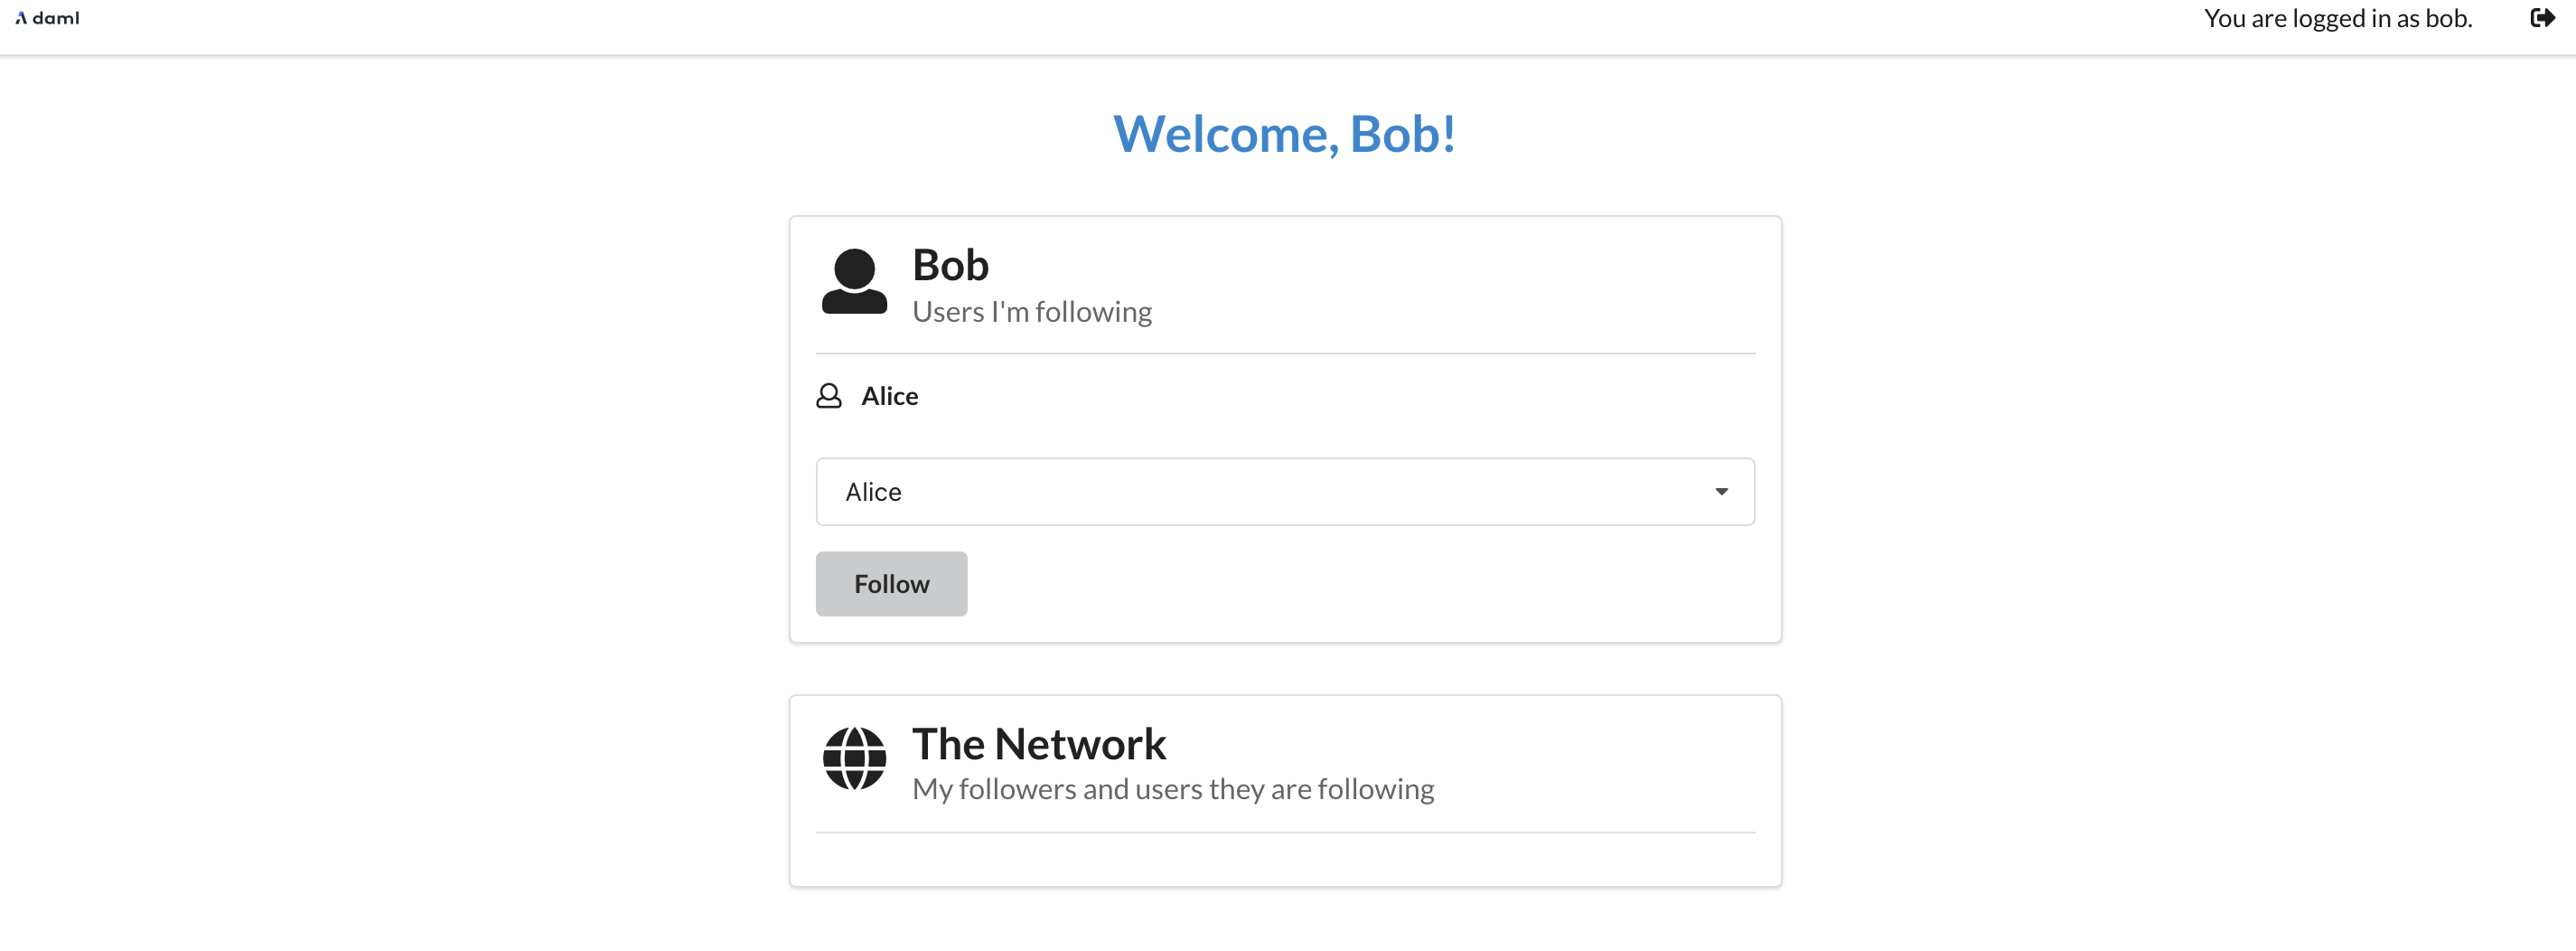 The app now shows Alice in Bob's Users I Follow section.